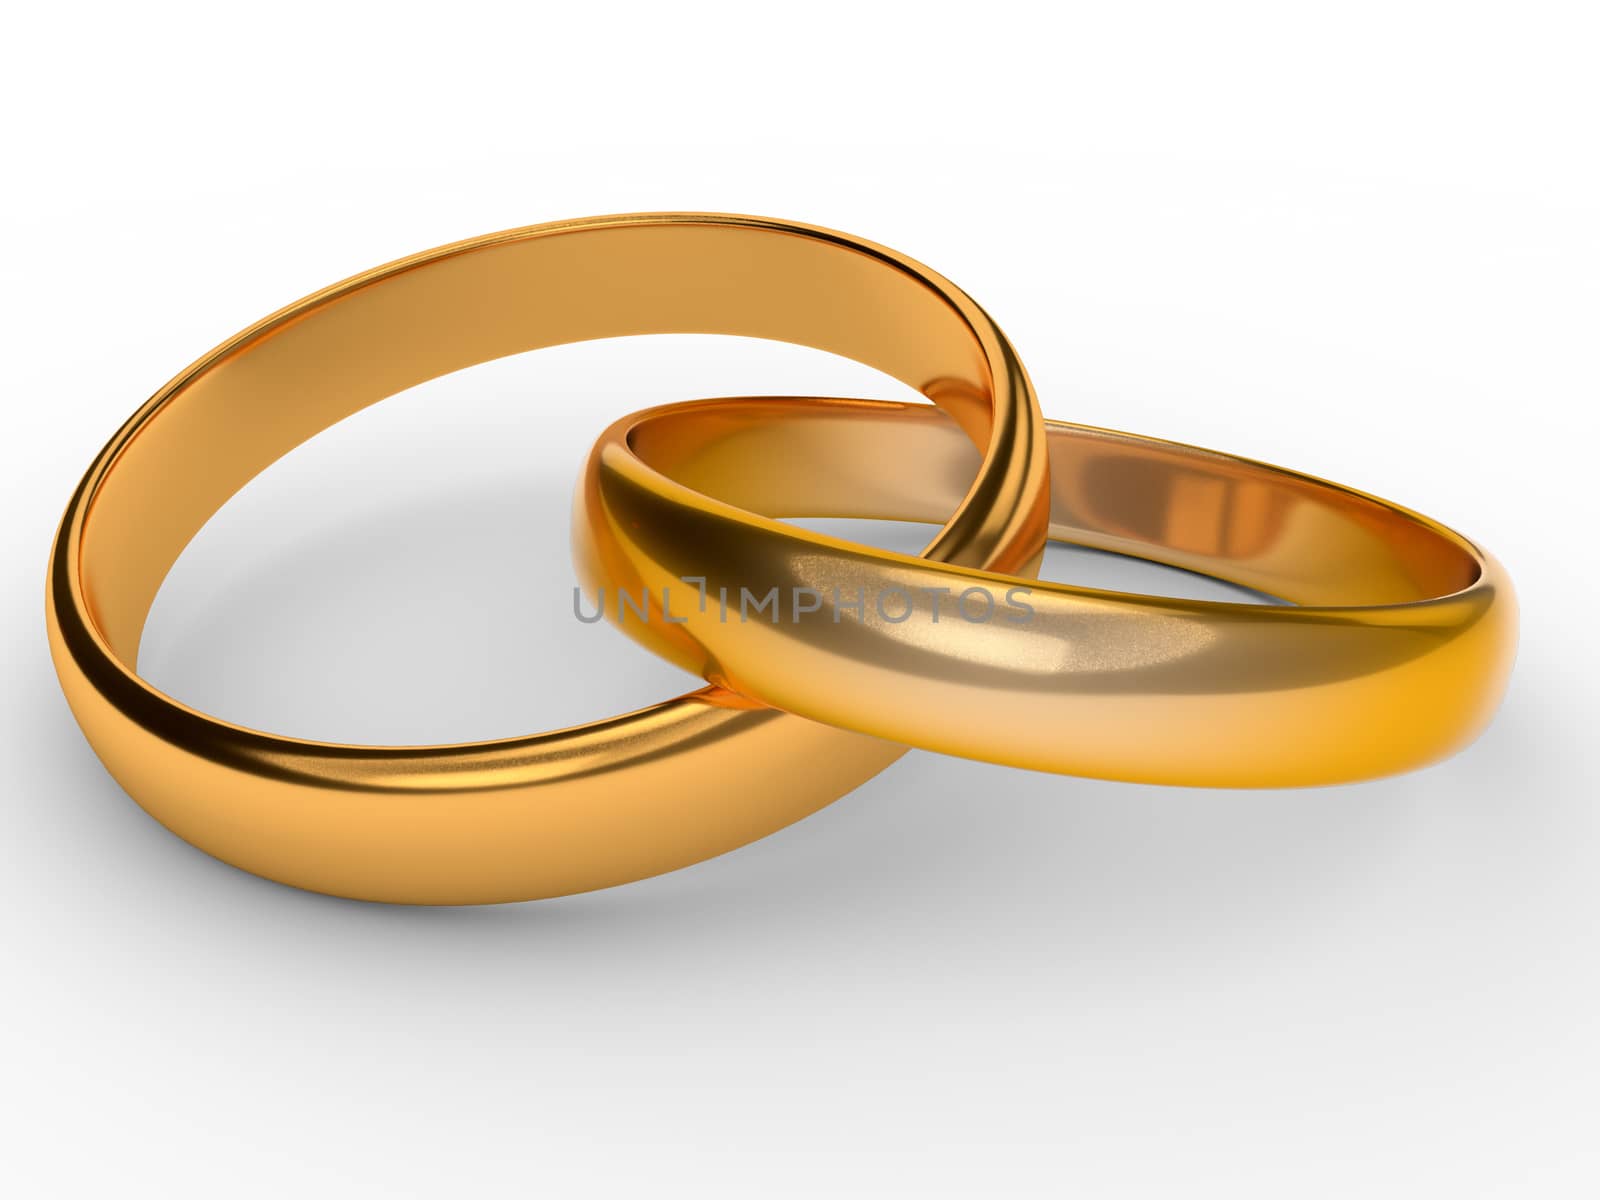 Two connected gold wedding rings over white